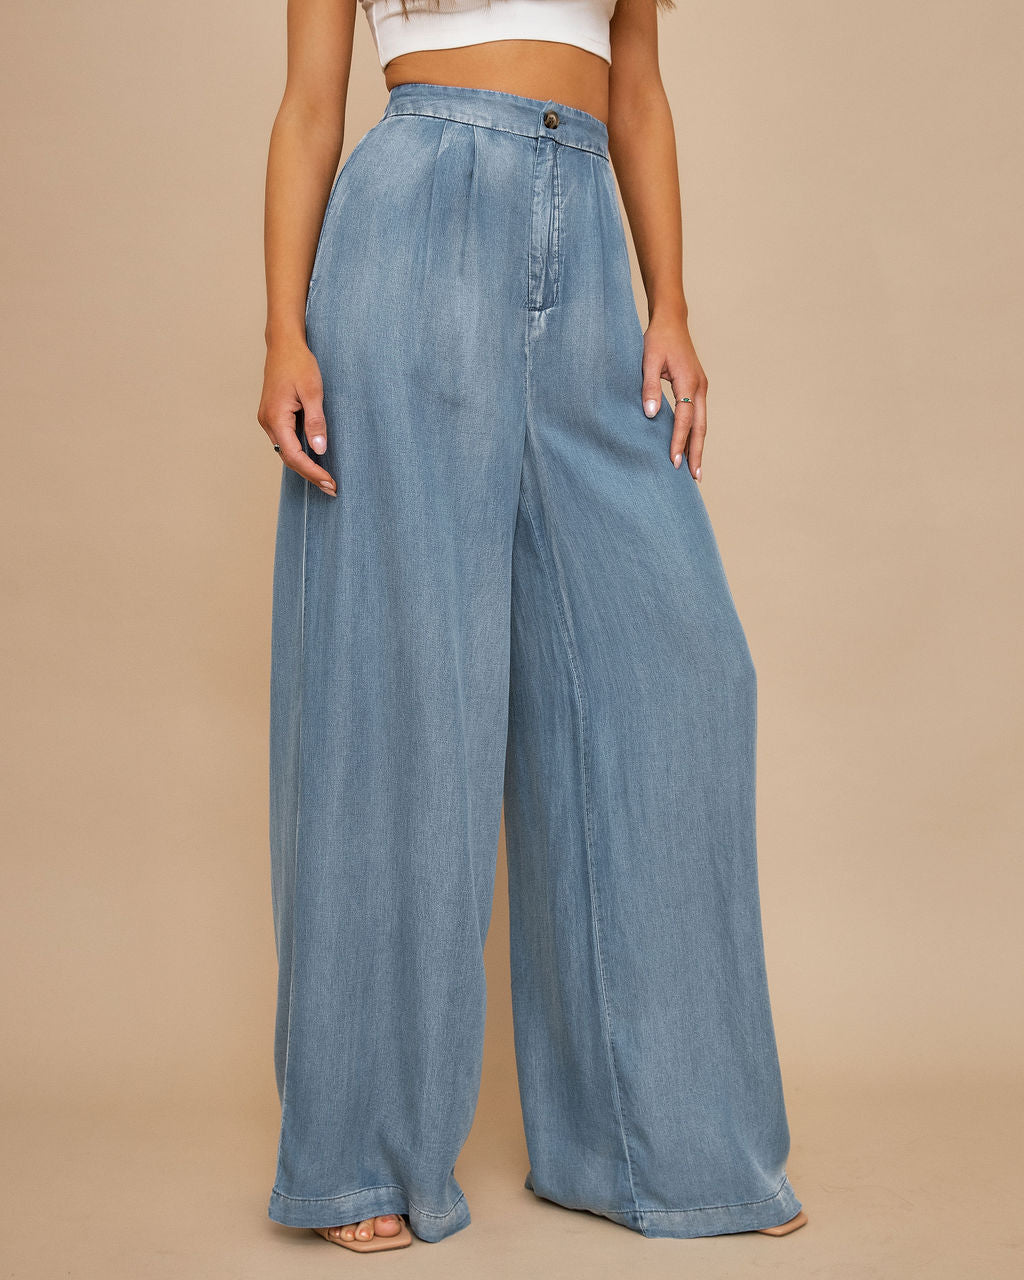 PREORDER - Compliments Washed Tencel Pocketed Pant Oshnow